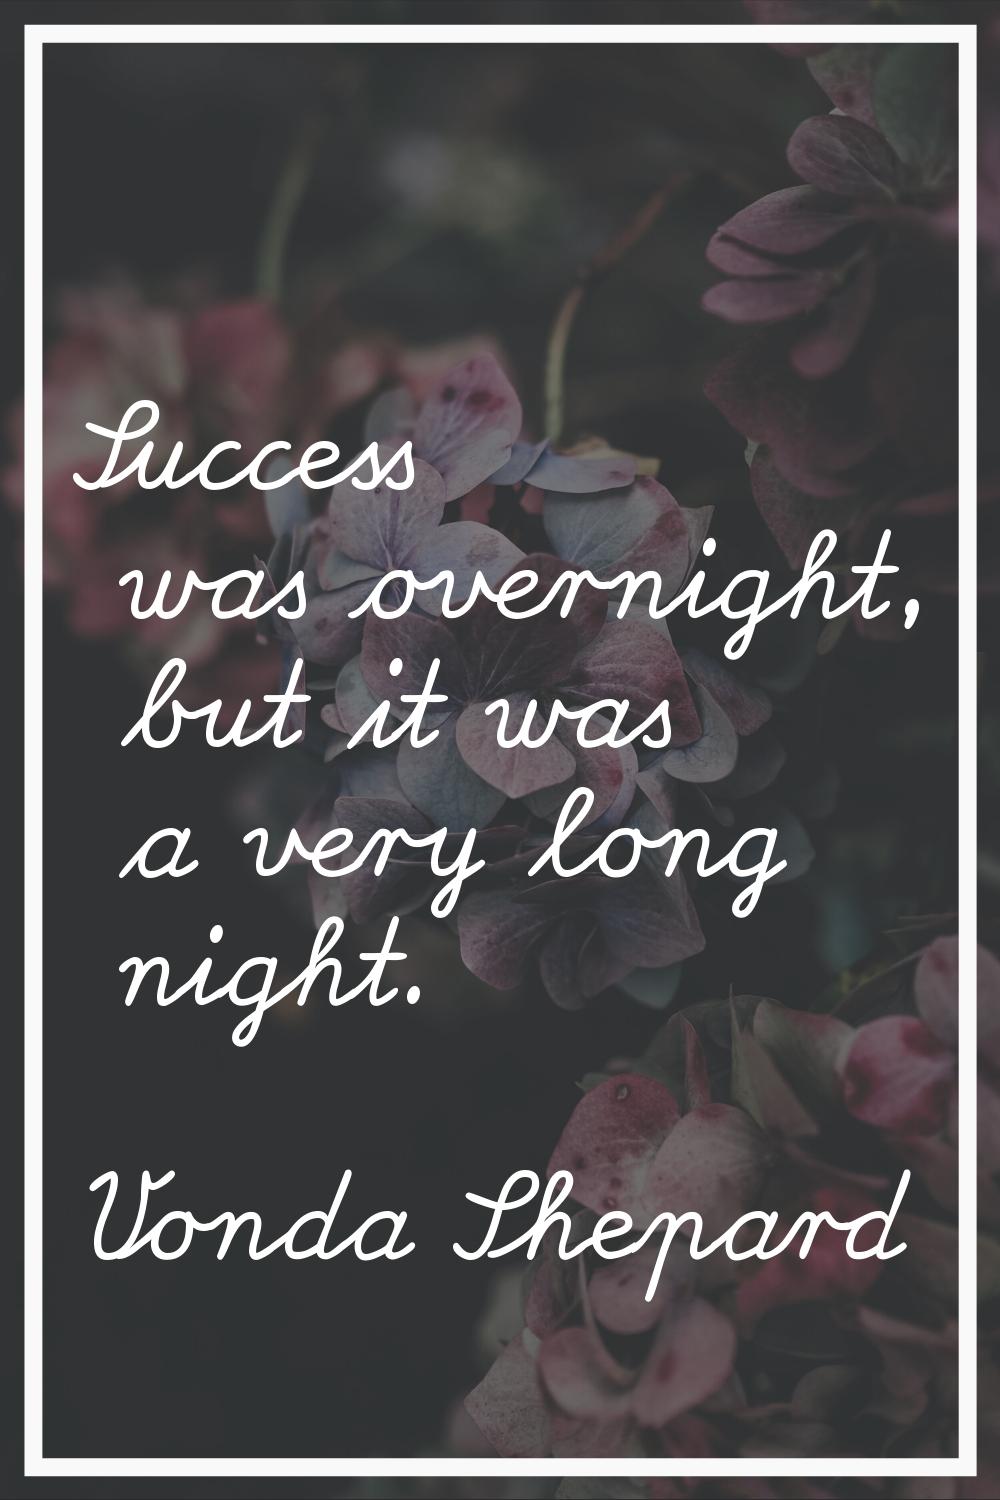 Success was overnight, but it was a very long night.